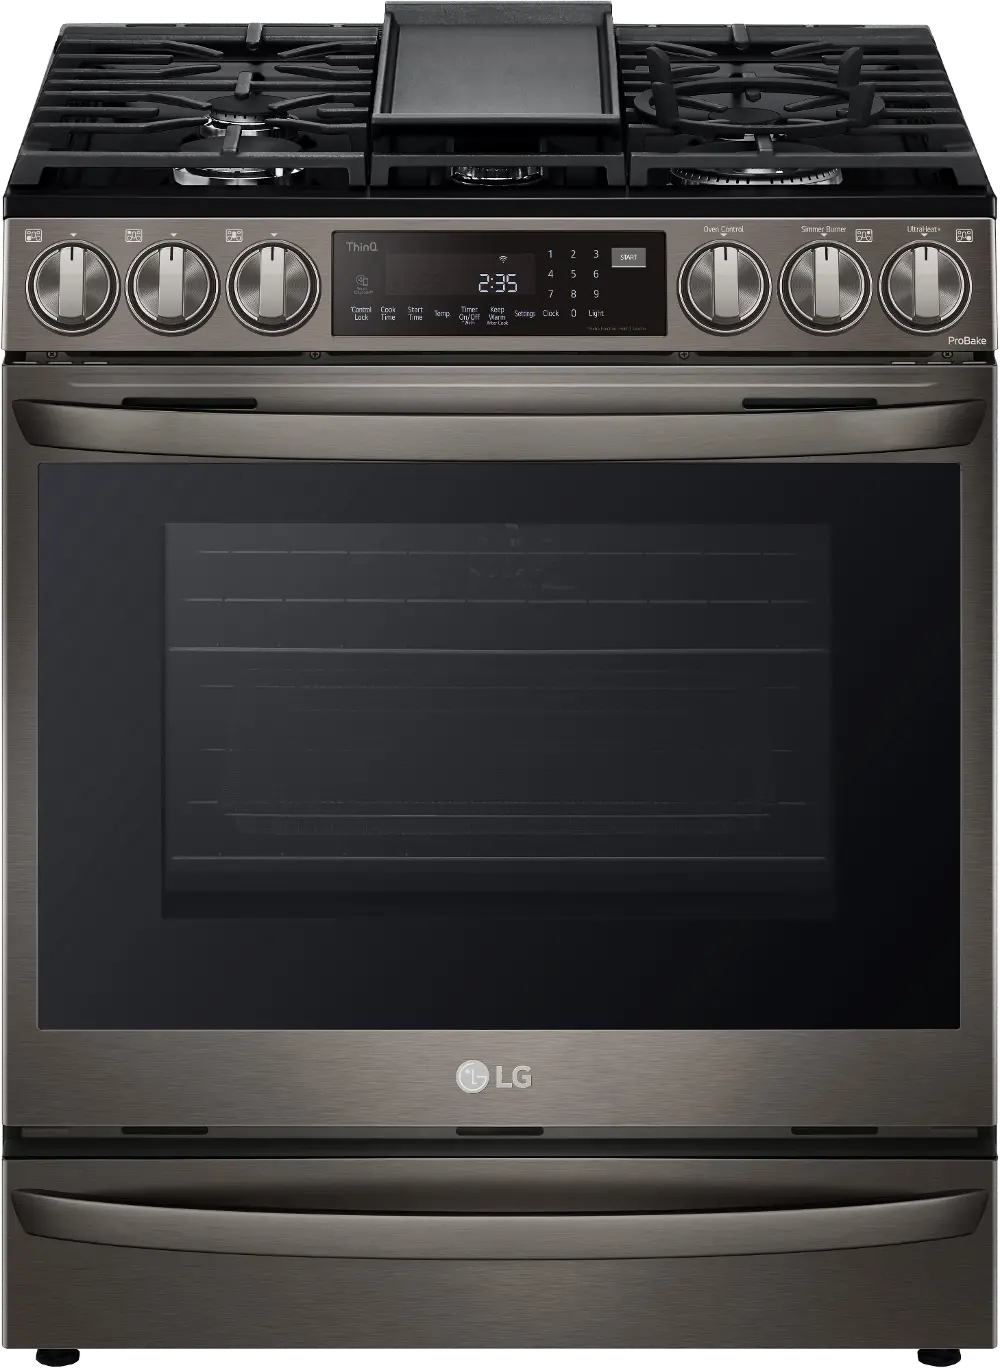 LSGL6337D LG 6.3 cu ft Gas Range with InstaView - Black Stainless Steel-1